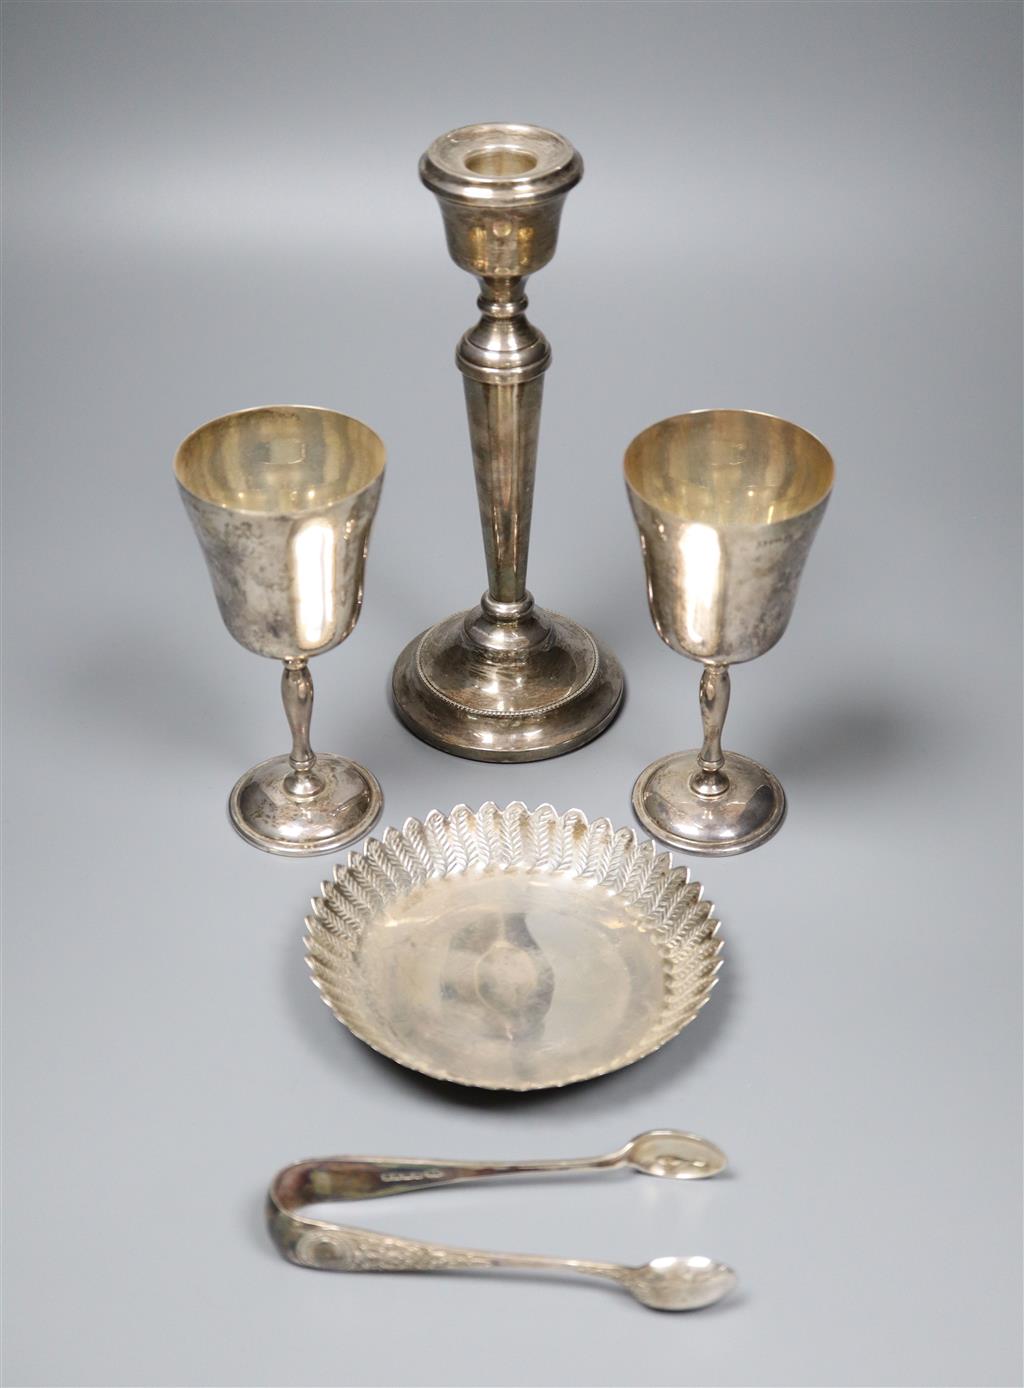 A pair of modern silver goblets, a silver candlestick, modern silver dis and pair of silver sugar tongs,